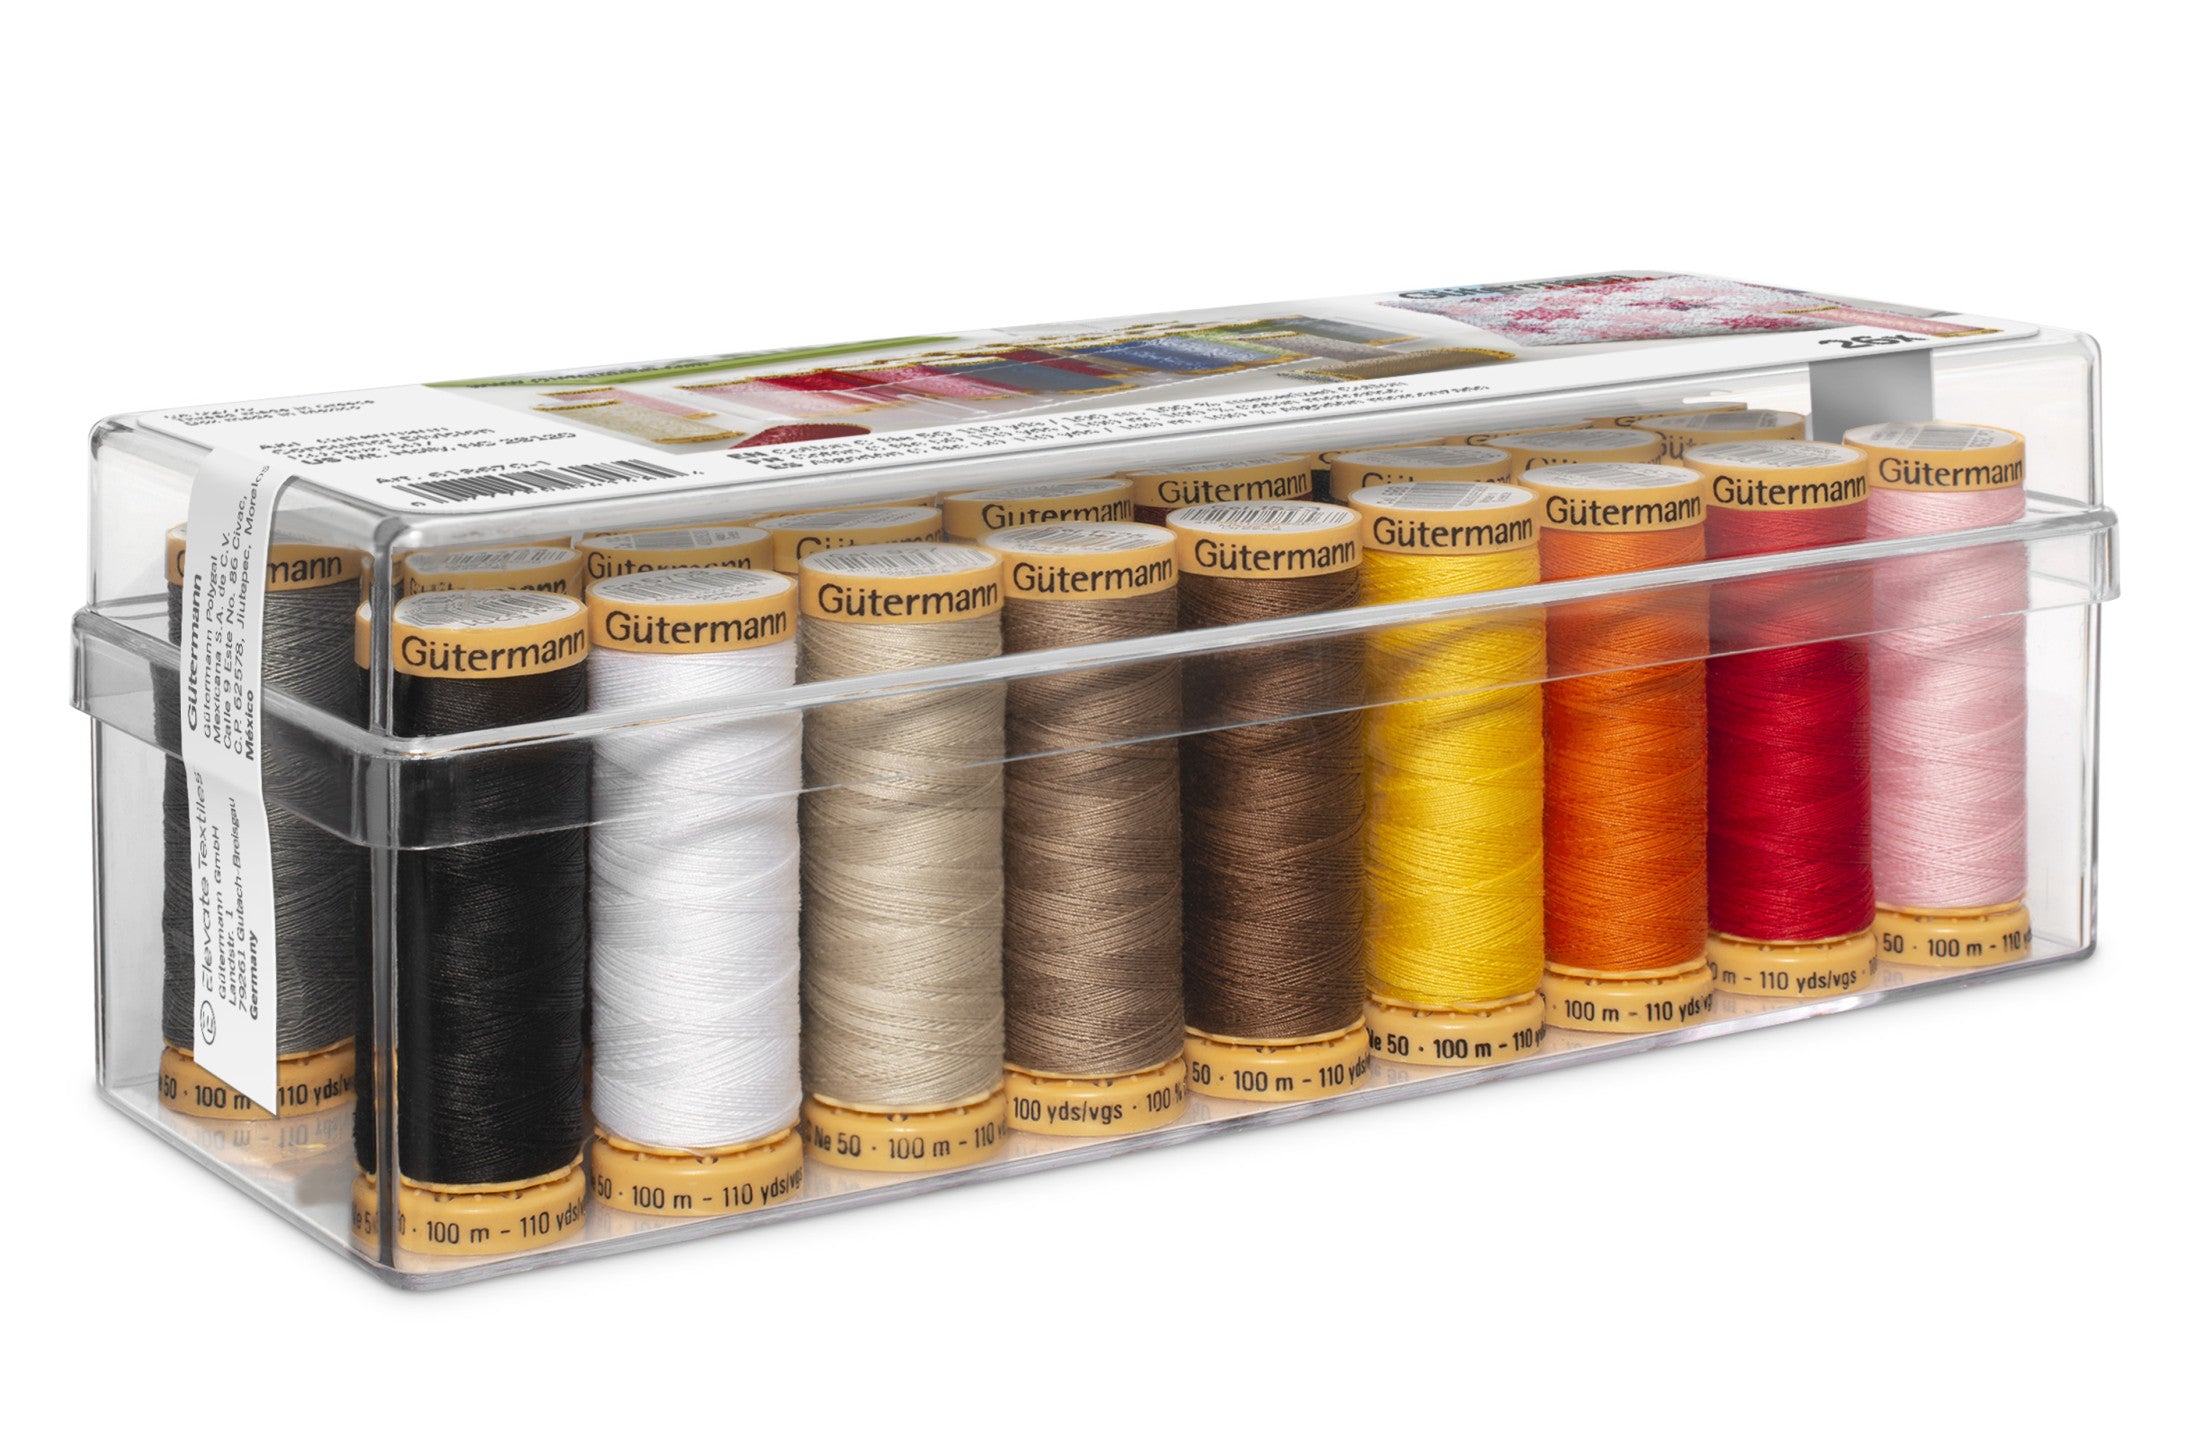  Sewing Thread Assortment Cotton Spools Thread Set for